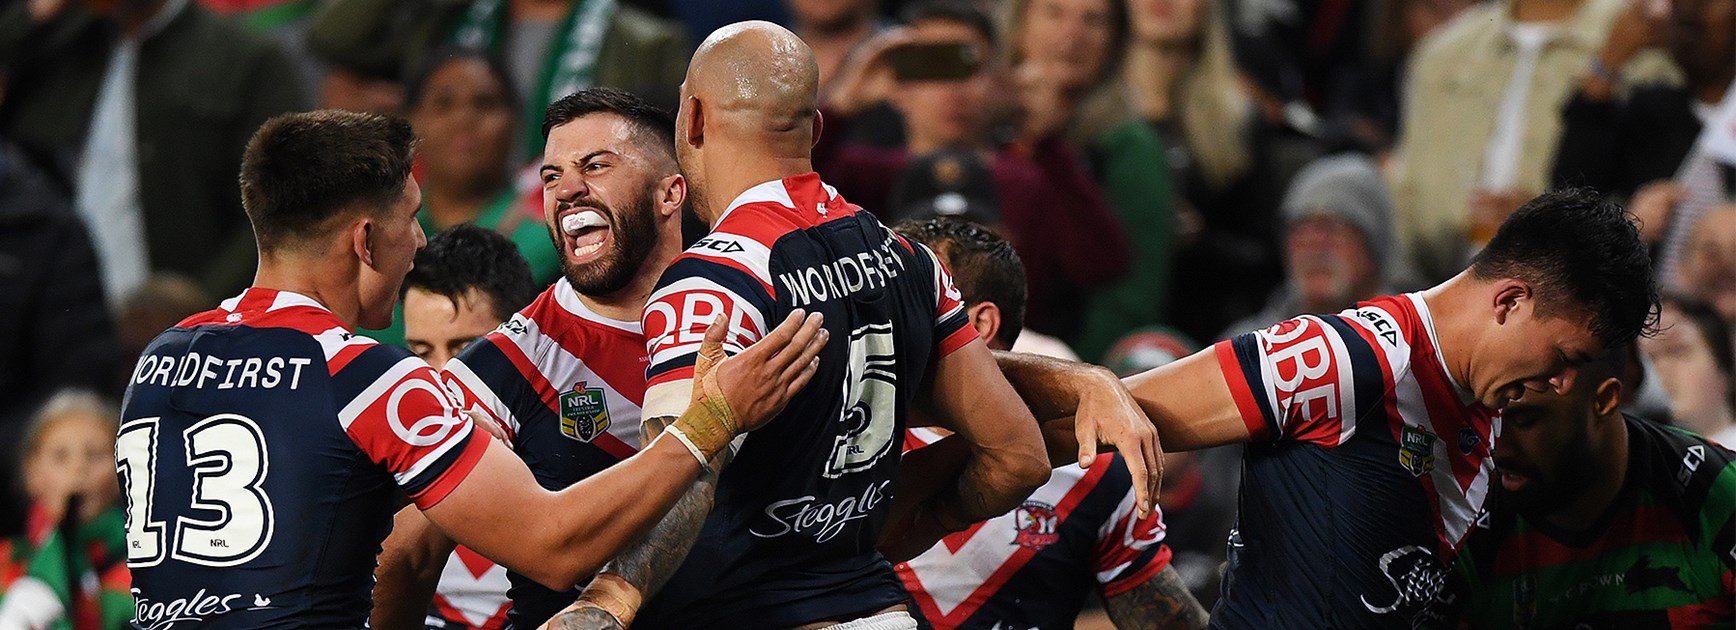 Cronk injured as Roosters beat Souths to earn grand final berth